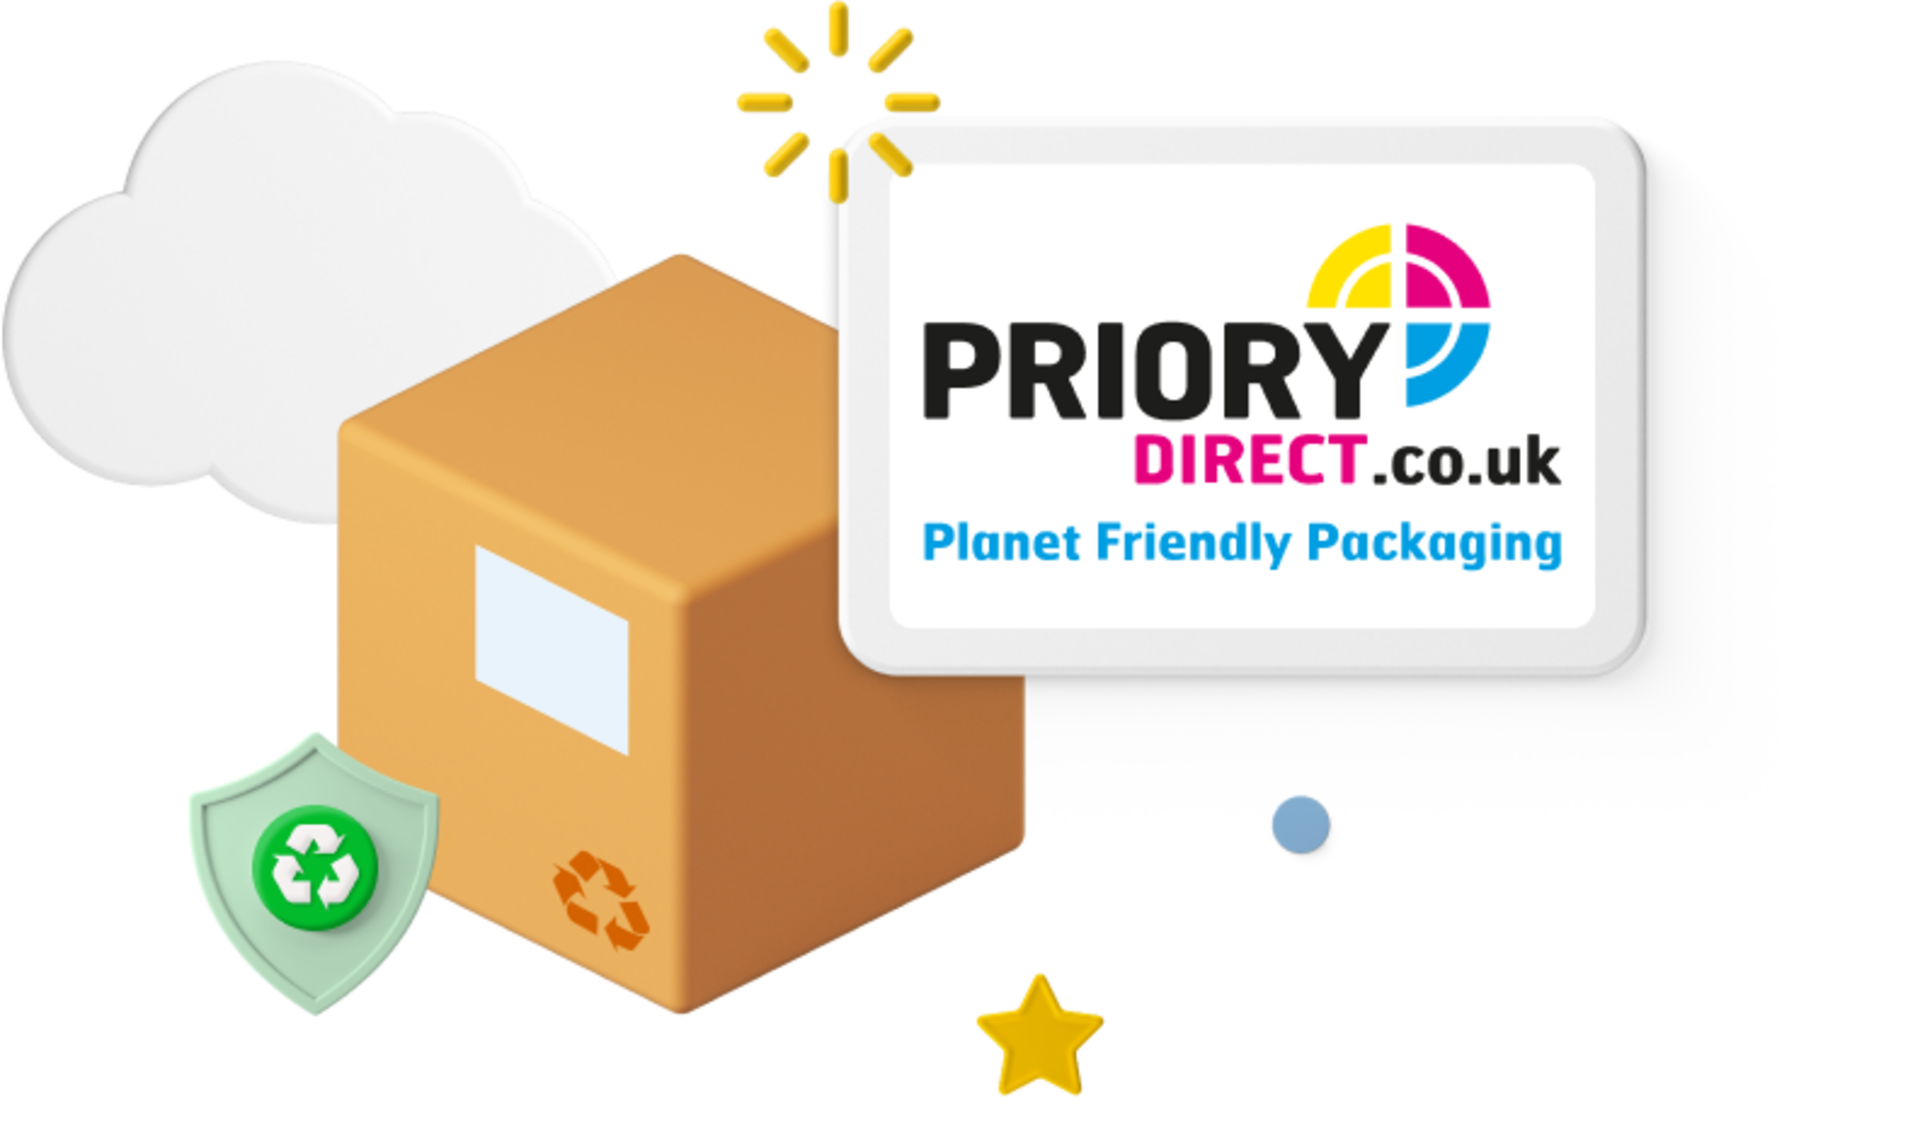 Priory direct hero beside image of a box and a recycle logo